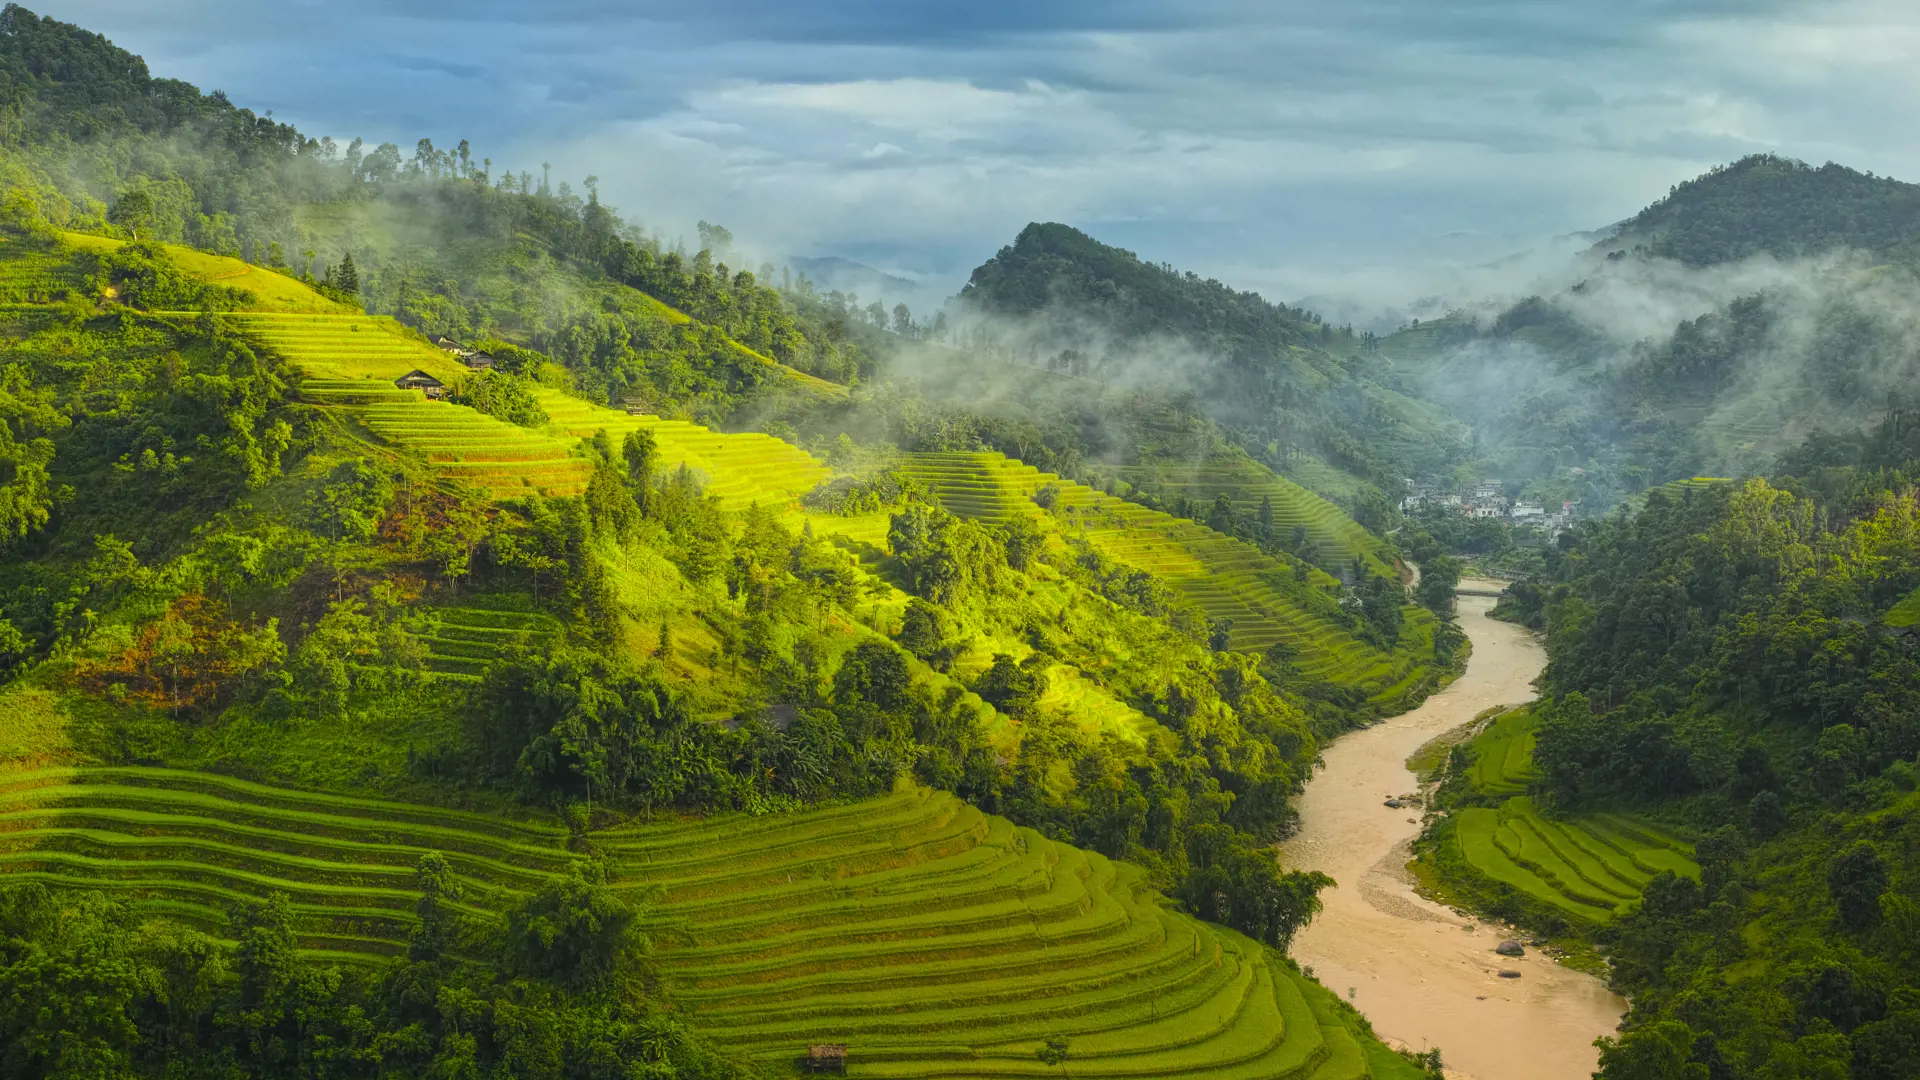 Terraced rice fields landscape with mountain, river, fog at Hoang Su Phi, Ha Giang, Vietnam.jpg